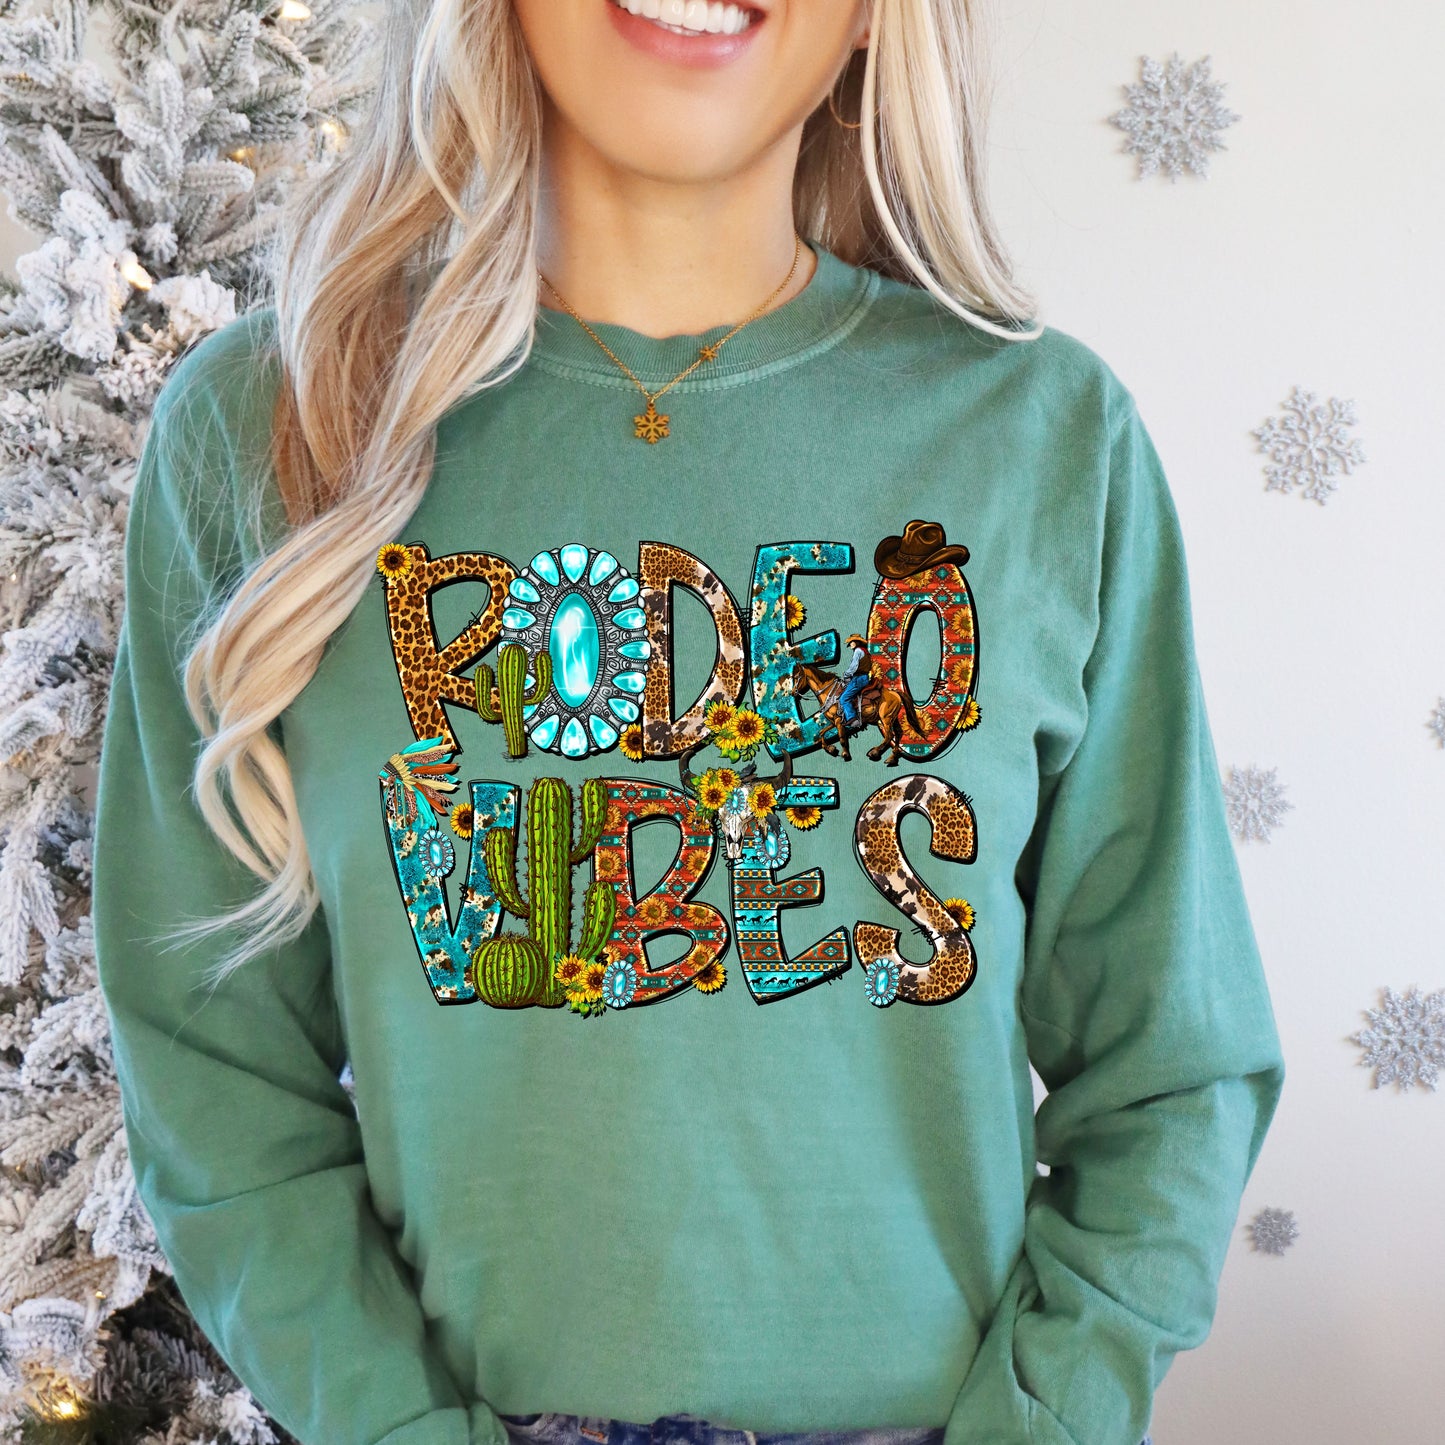 Rodeo Vibes Garment-dyed Long Sleeve T-Shirt, Rodeo T-Shirt, Western T-Shirt, Rodeo Shirt, Gifts for Her, Gifts For Mom, Rodeo Tee